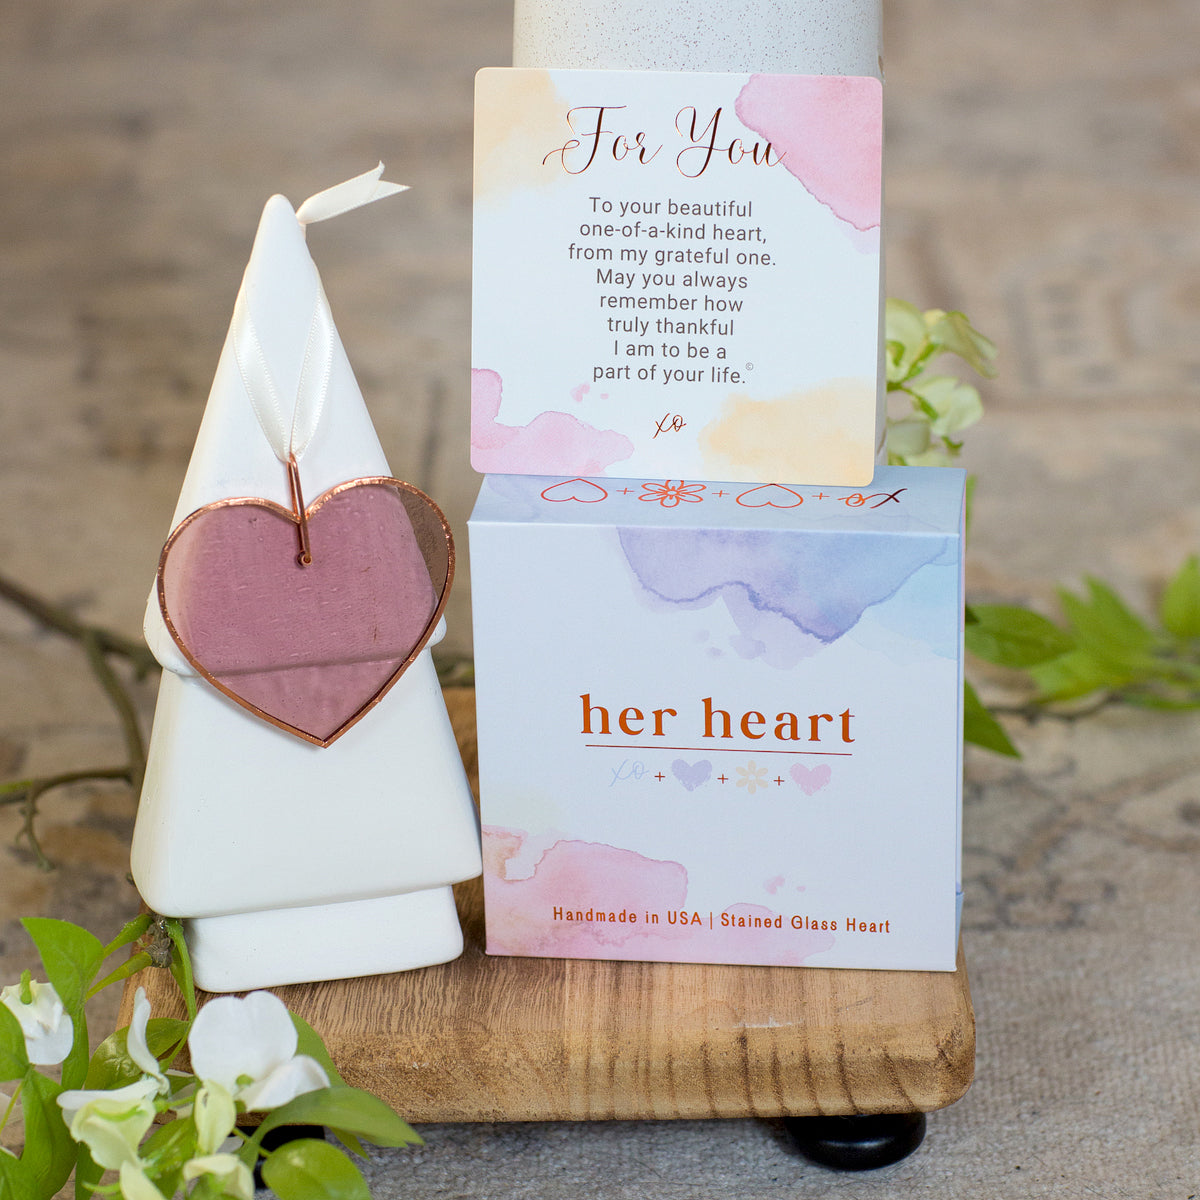 Her Heart For You gift with box, sentiment card, and pink stain glass heart.